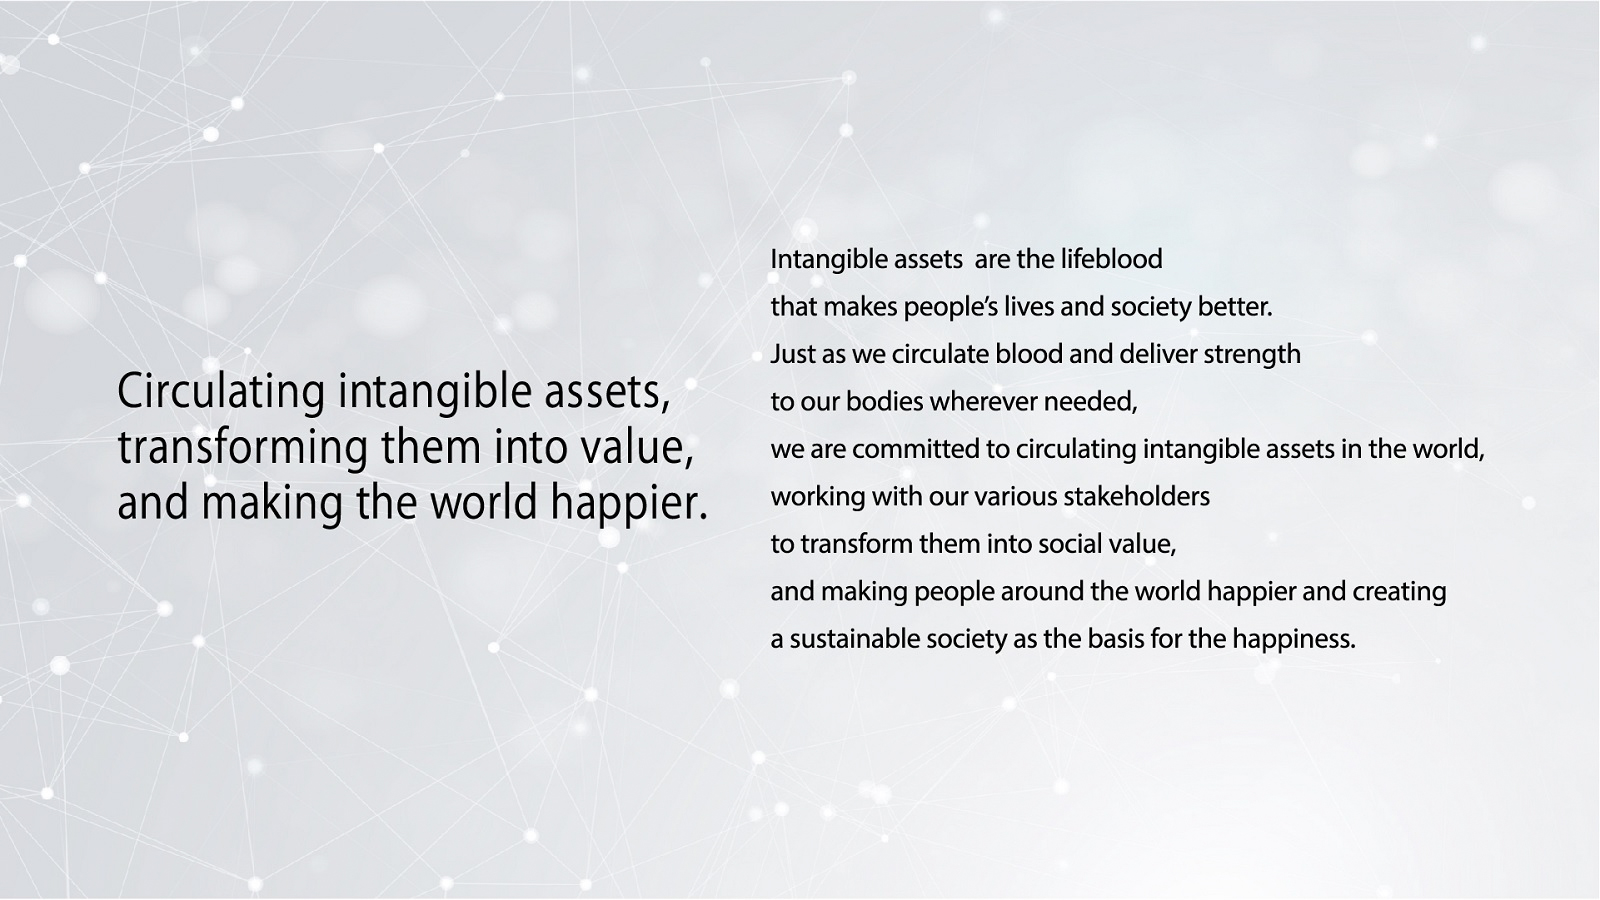 Image: Circulating intangible assets, transforming them into value, and making the world happier.